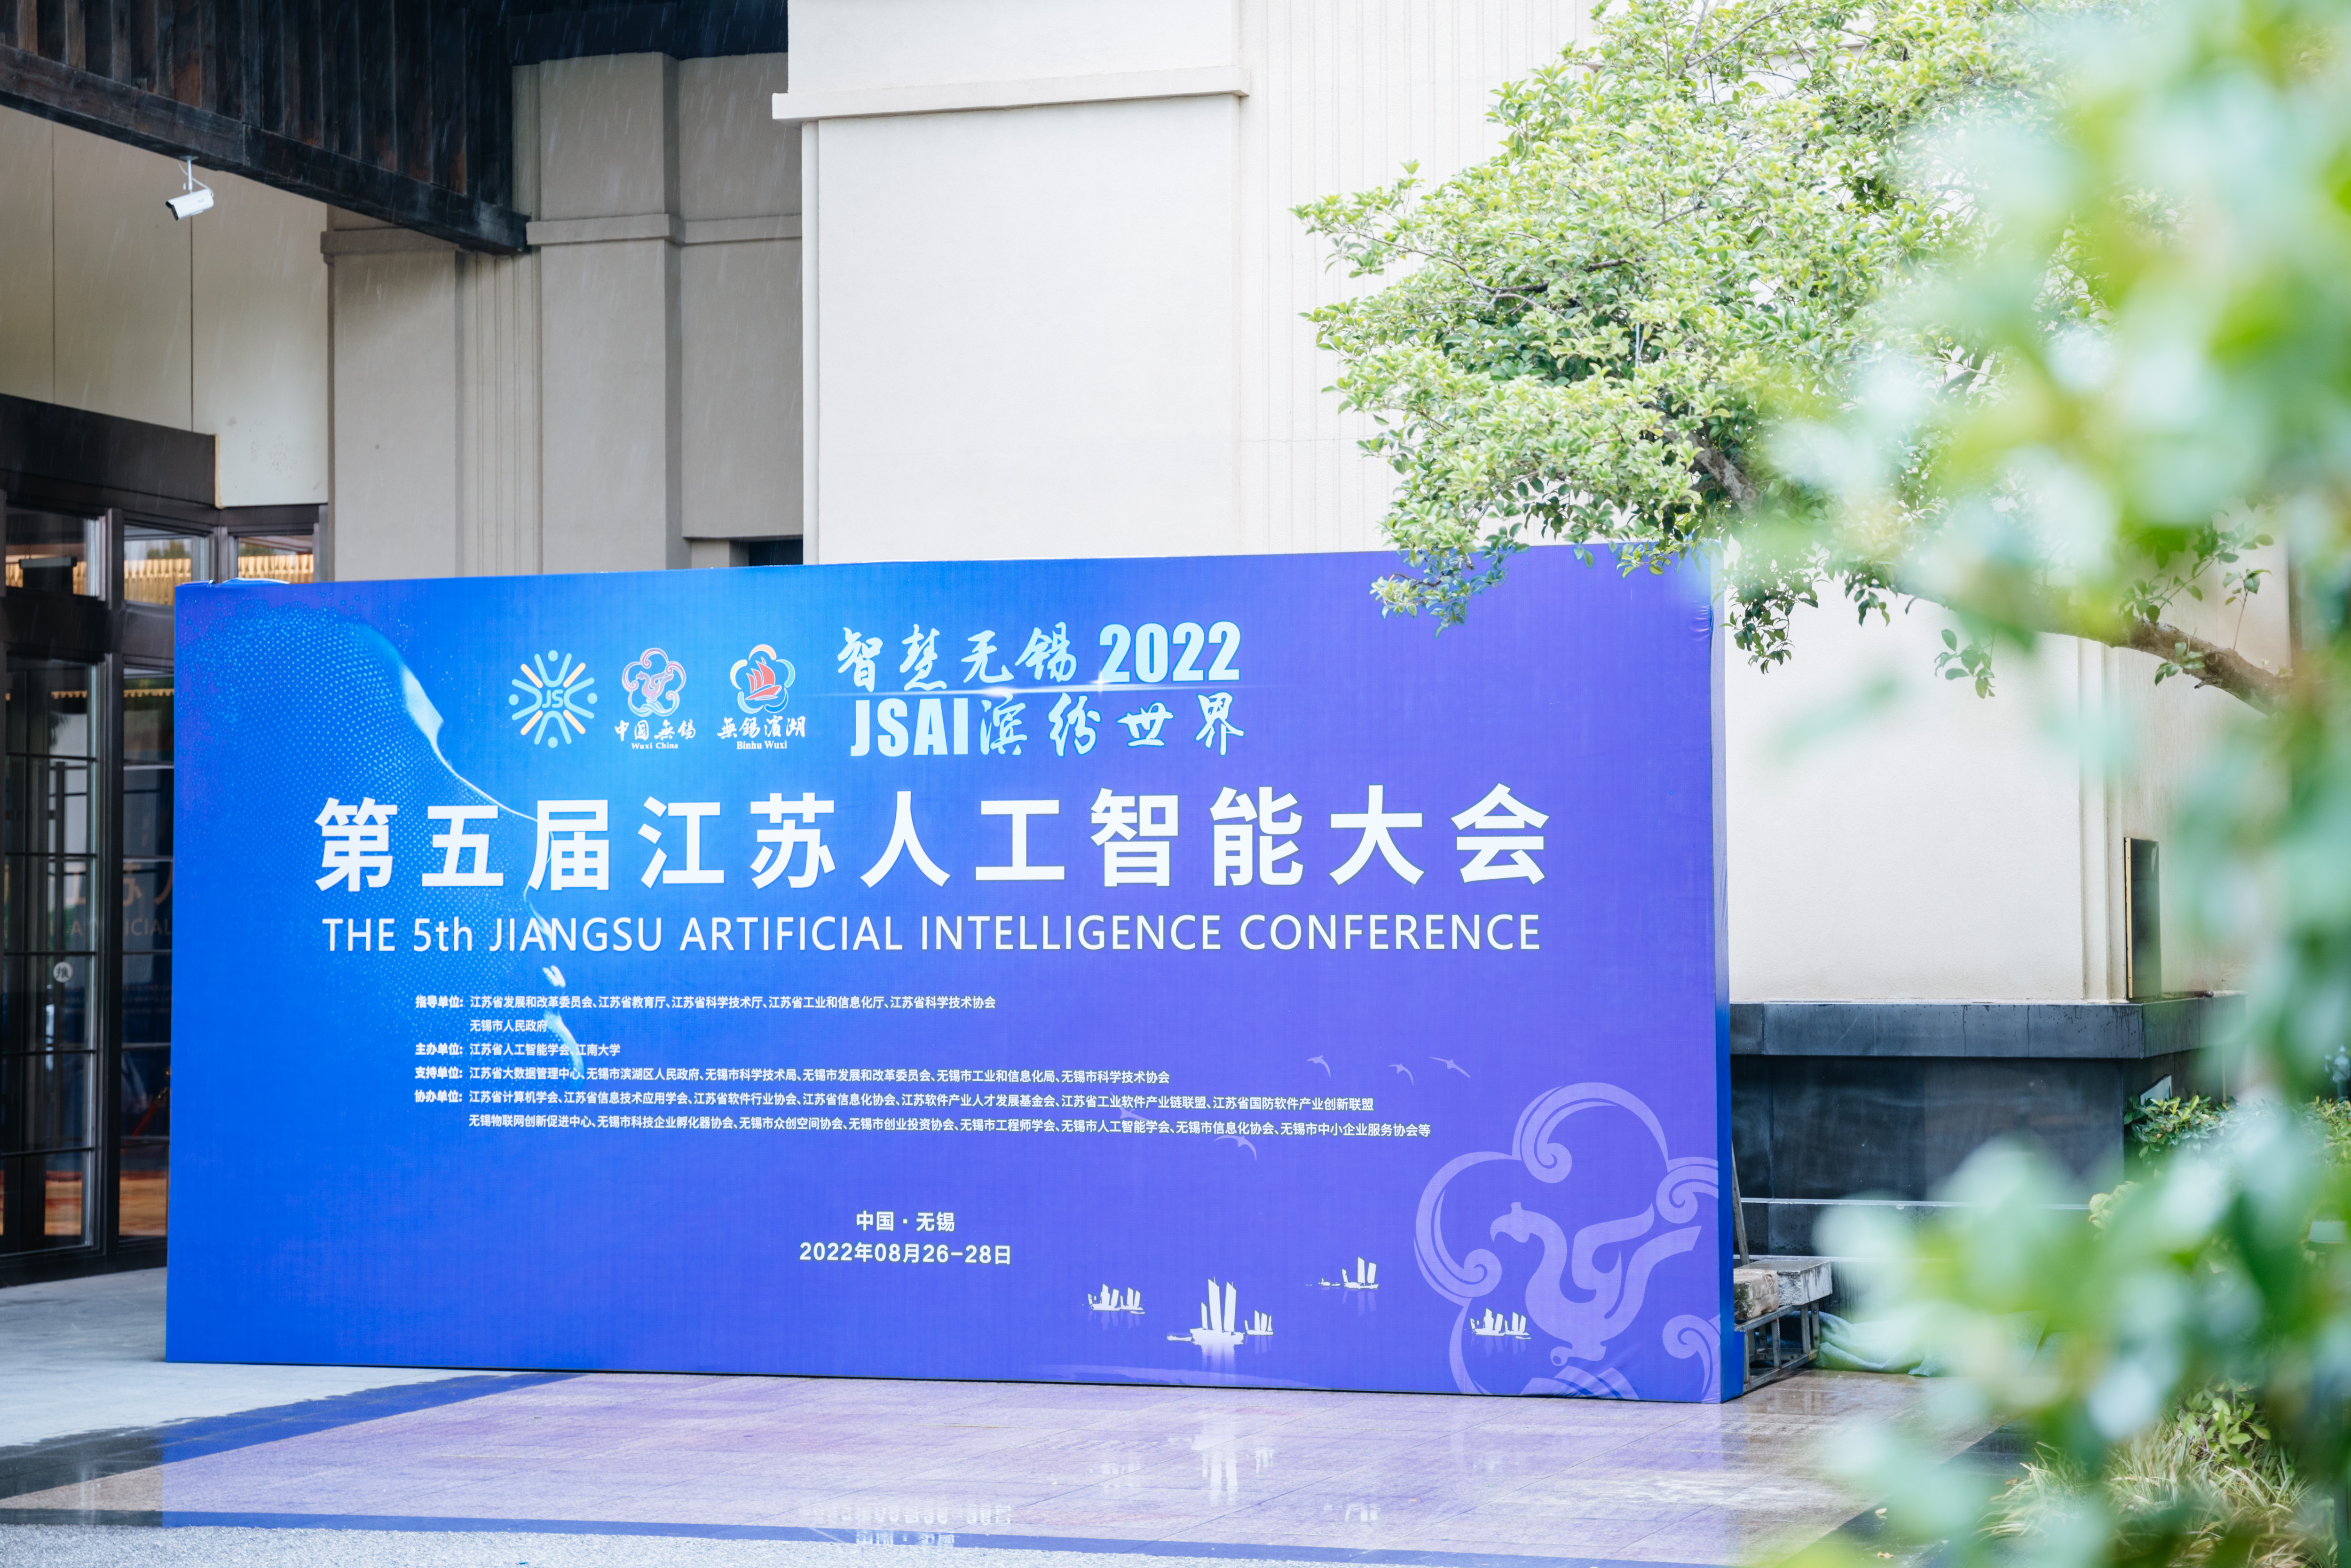 Minivision Technology Attends the 2022 Jiangsu Artificial Intelligence Conference to Explore New possibilities for machine vision applications